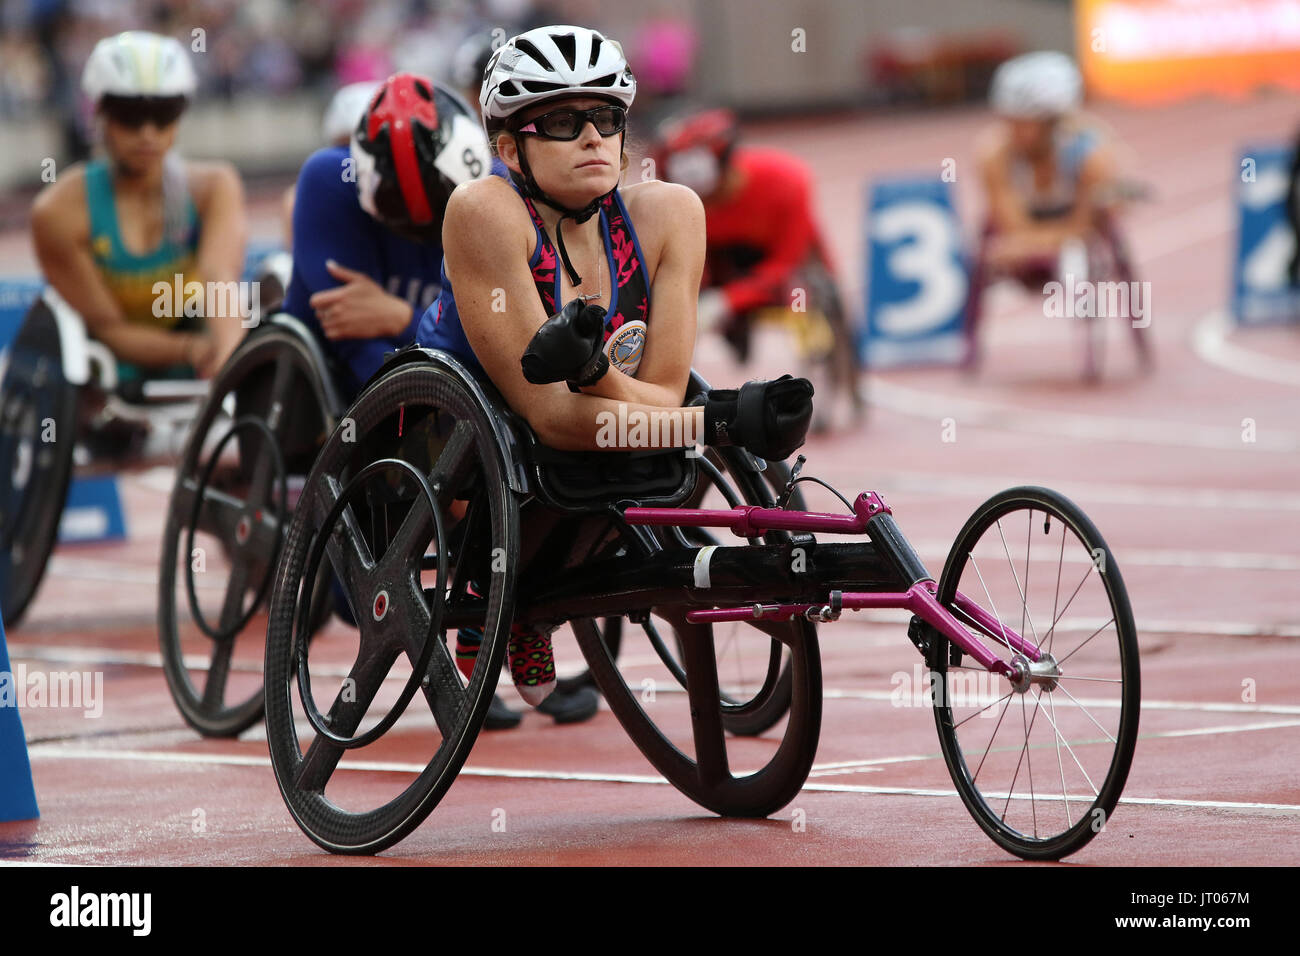 Jessica Cooper LEWIS of Bermuda in the Women's 800m T53 Final at the World Para Championships in London 2017 Stock Photo